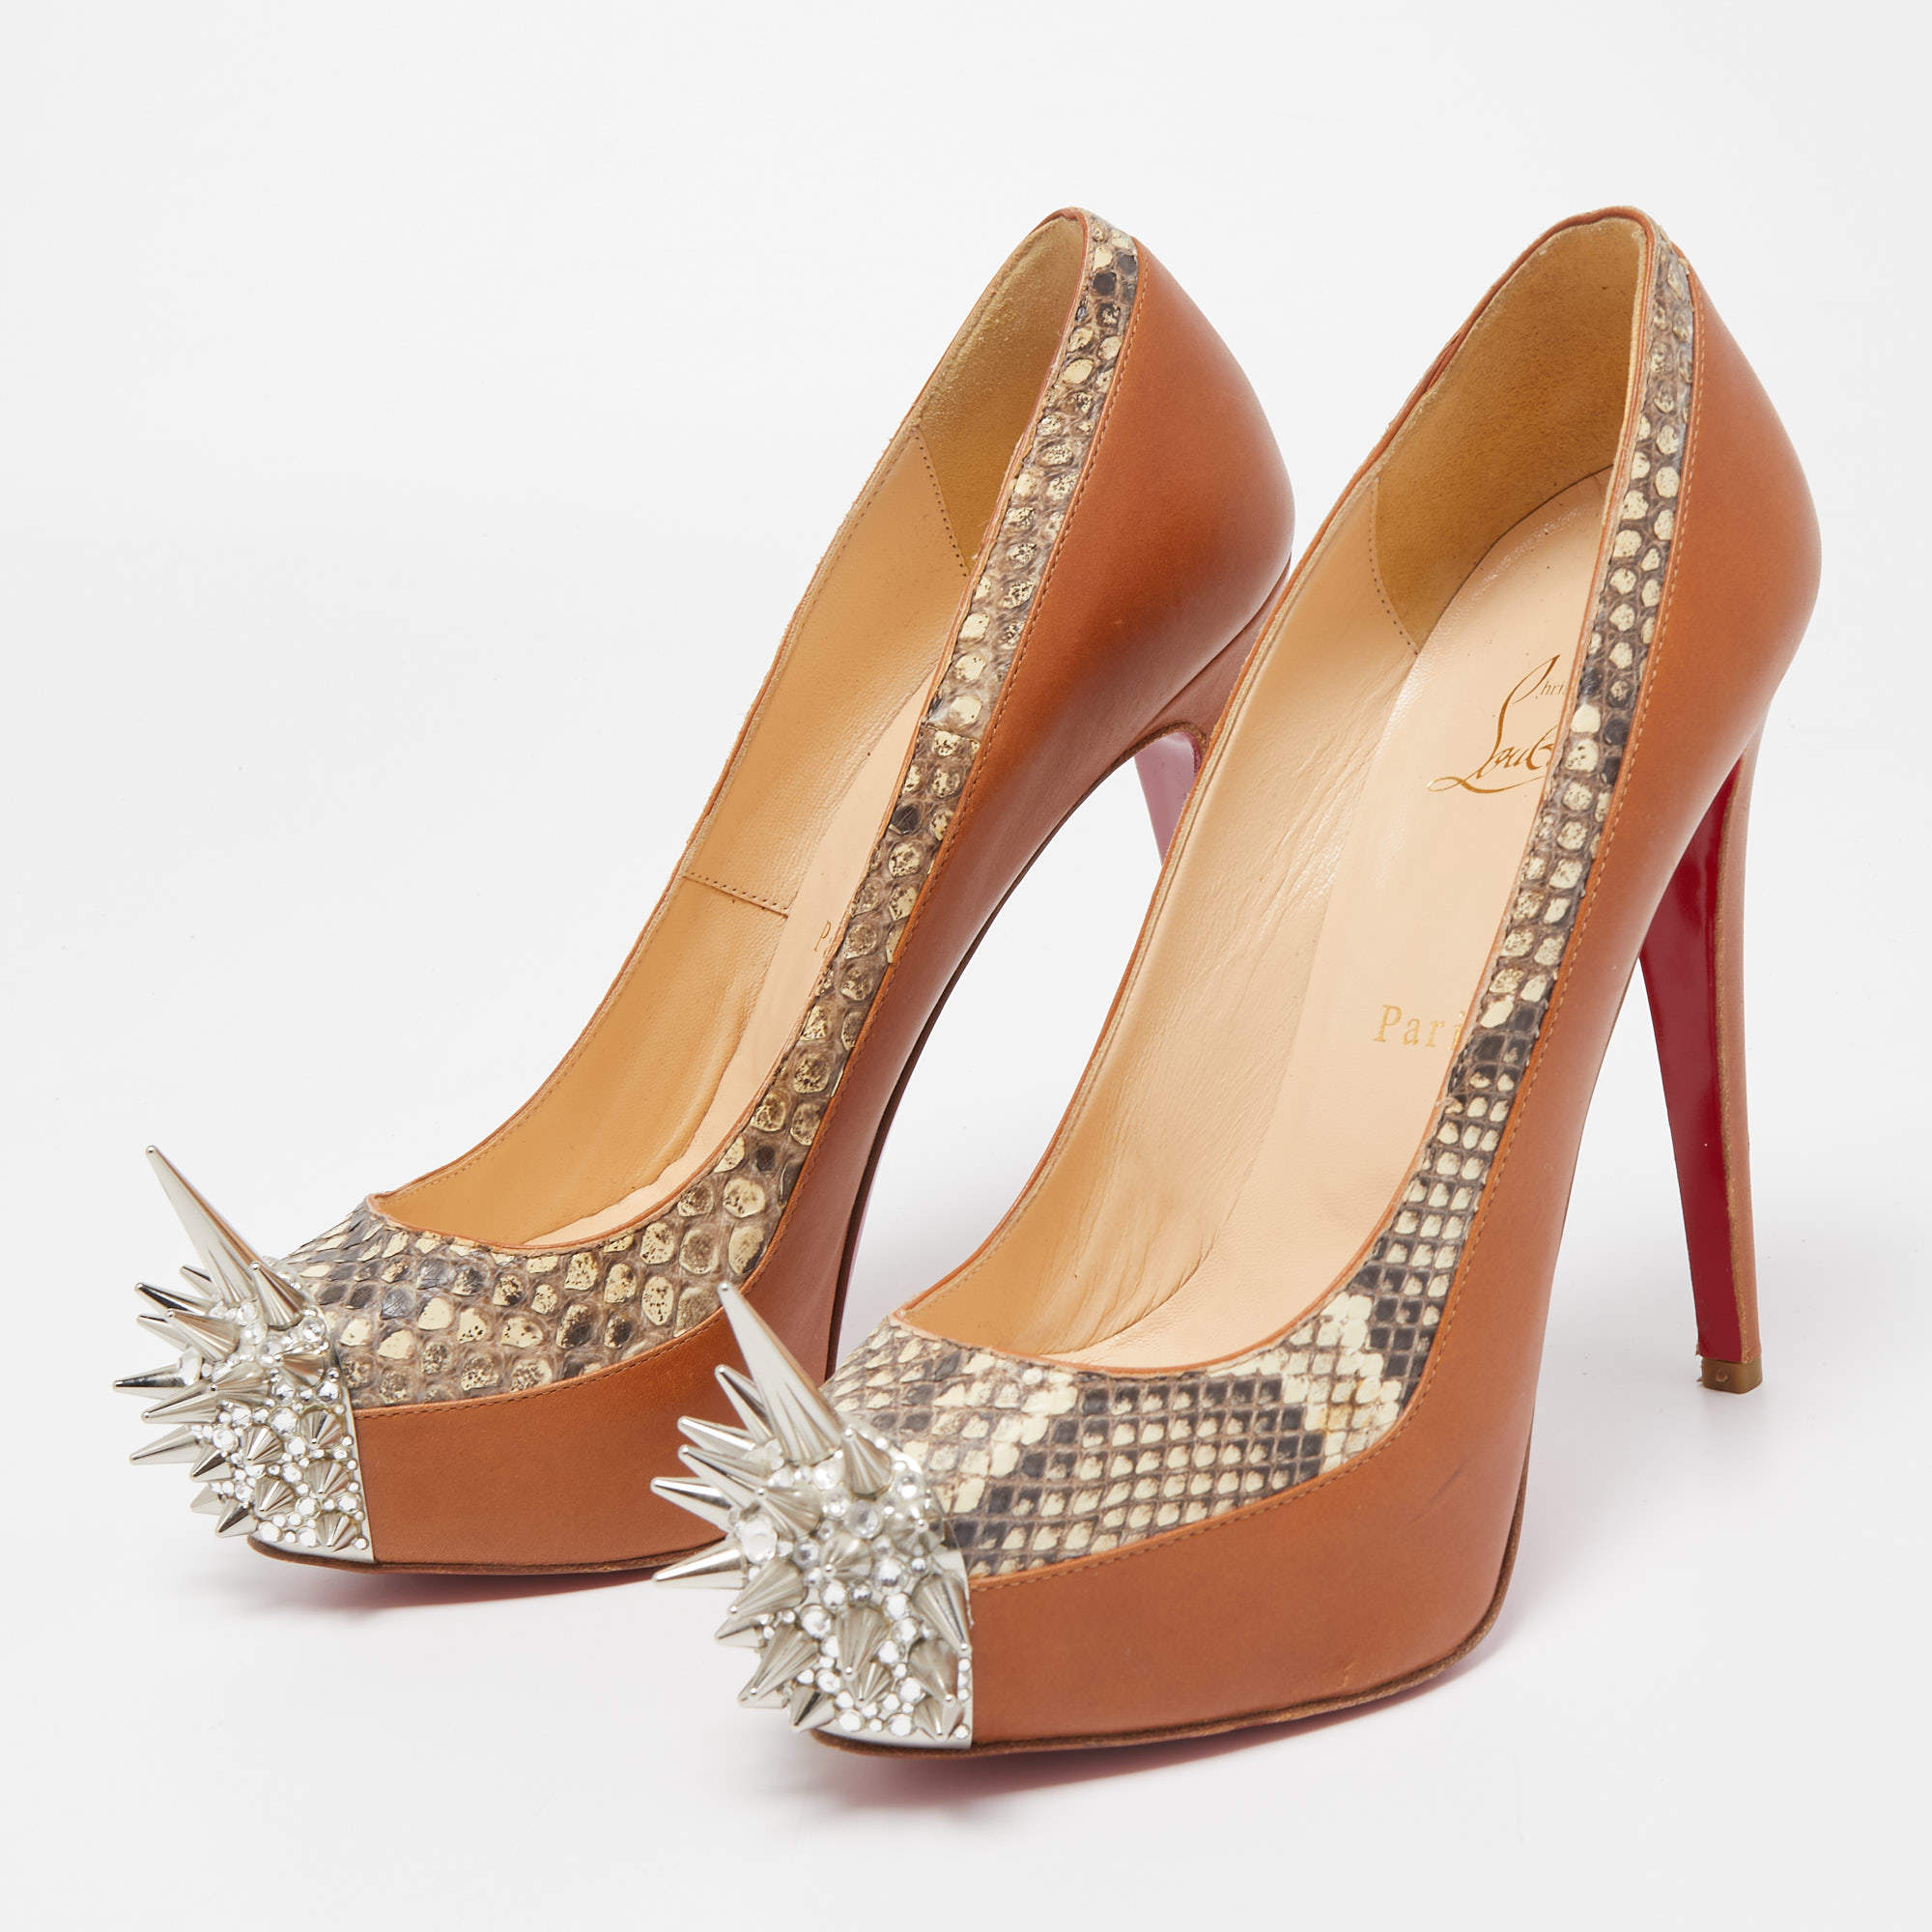 Christian Louboutin Asteroid Suede and Patent Leather Spike Pumps in Black